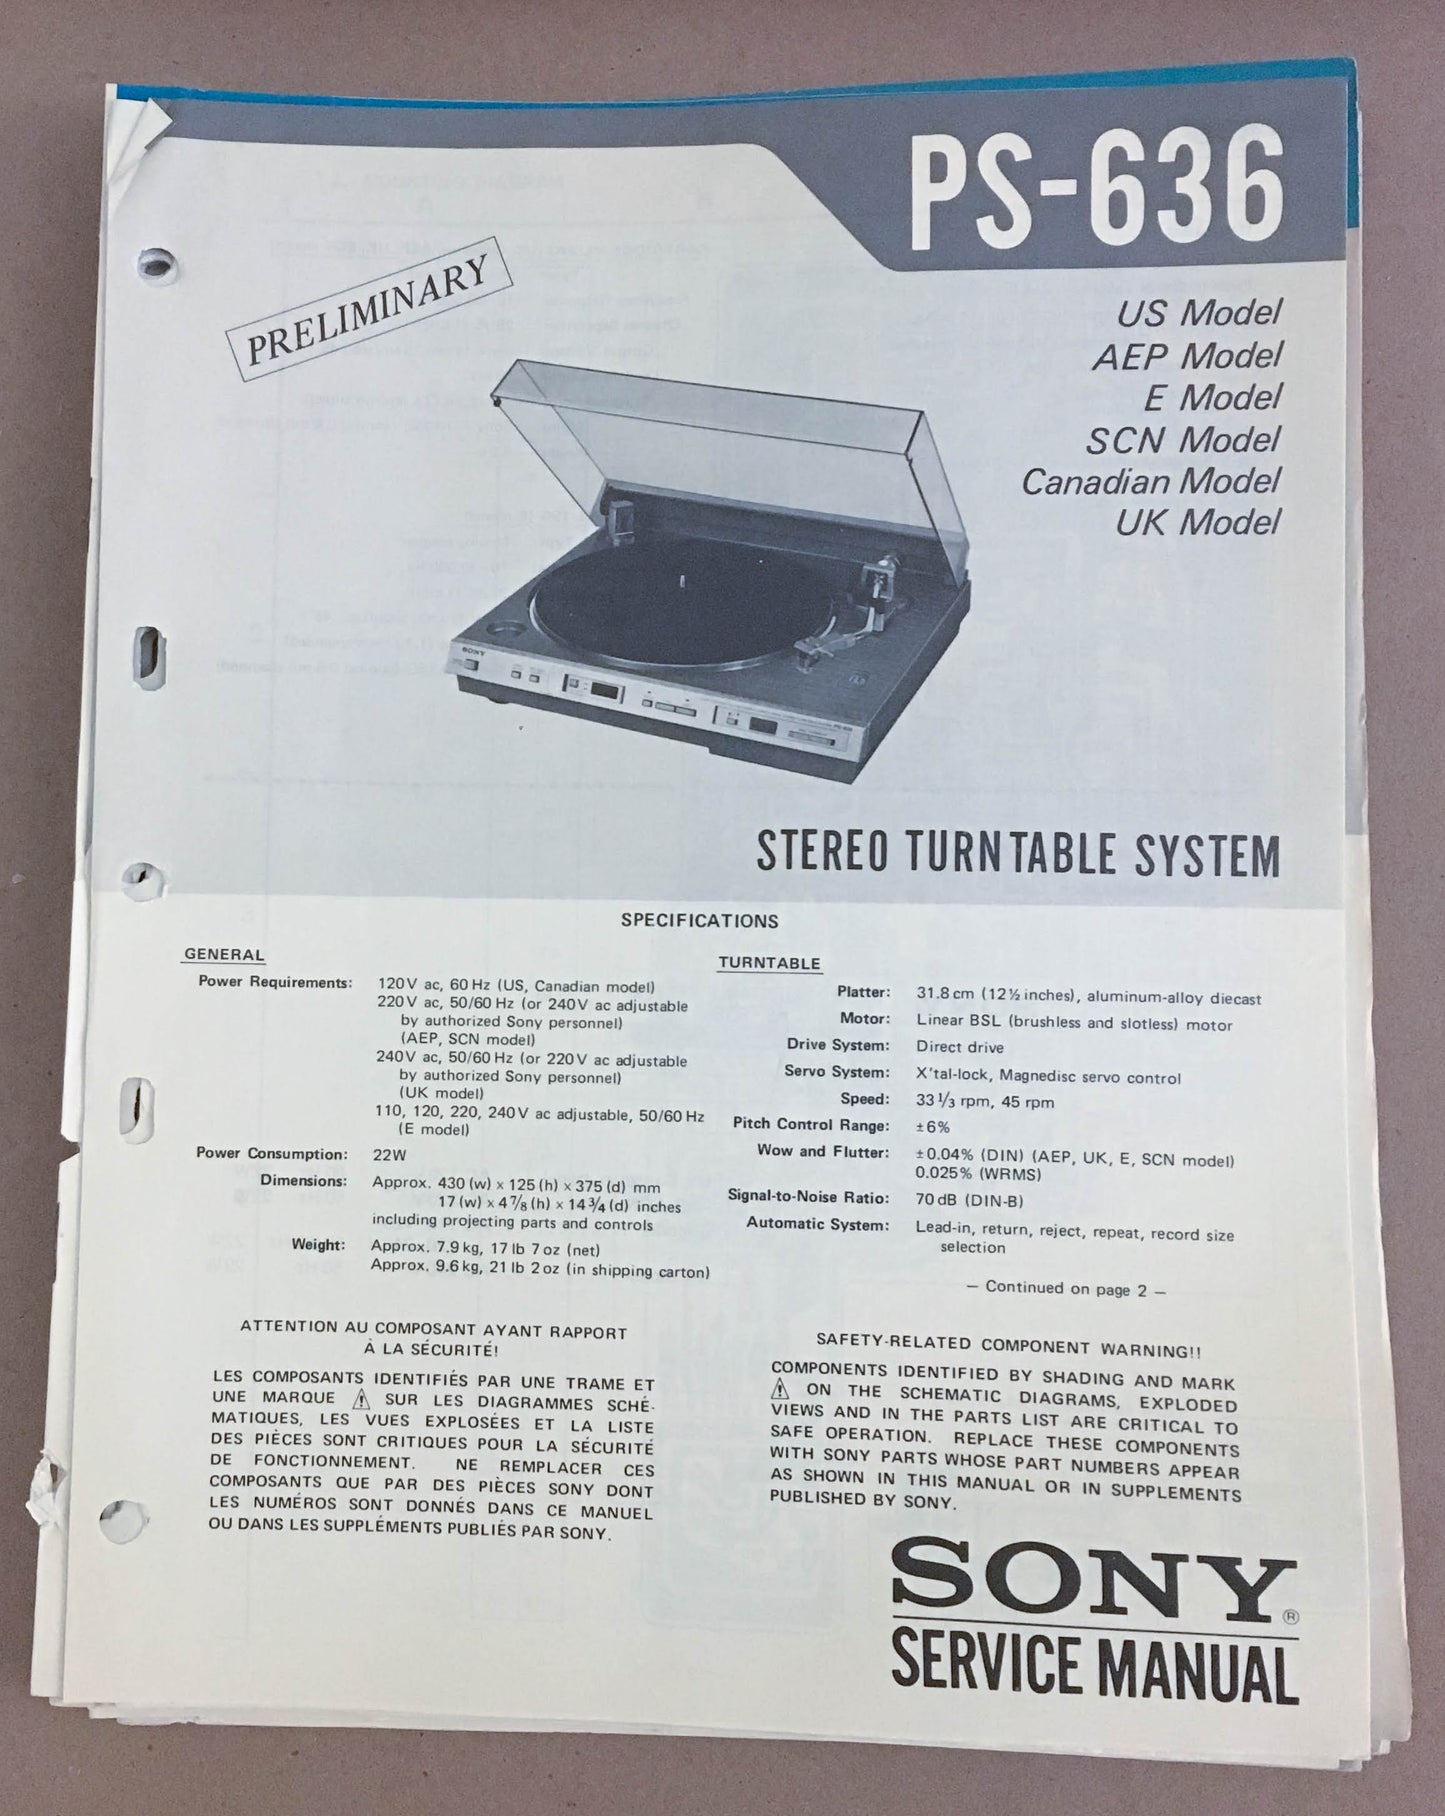 Sony PS-636 Turntable Record Player  PRELIMINARY Service Manual *Original*